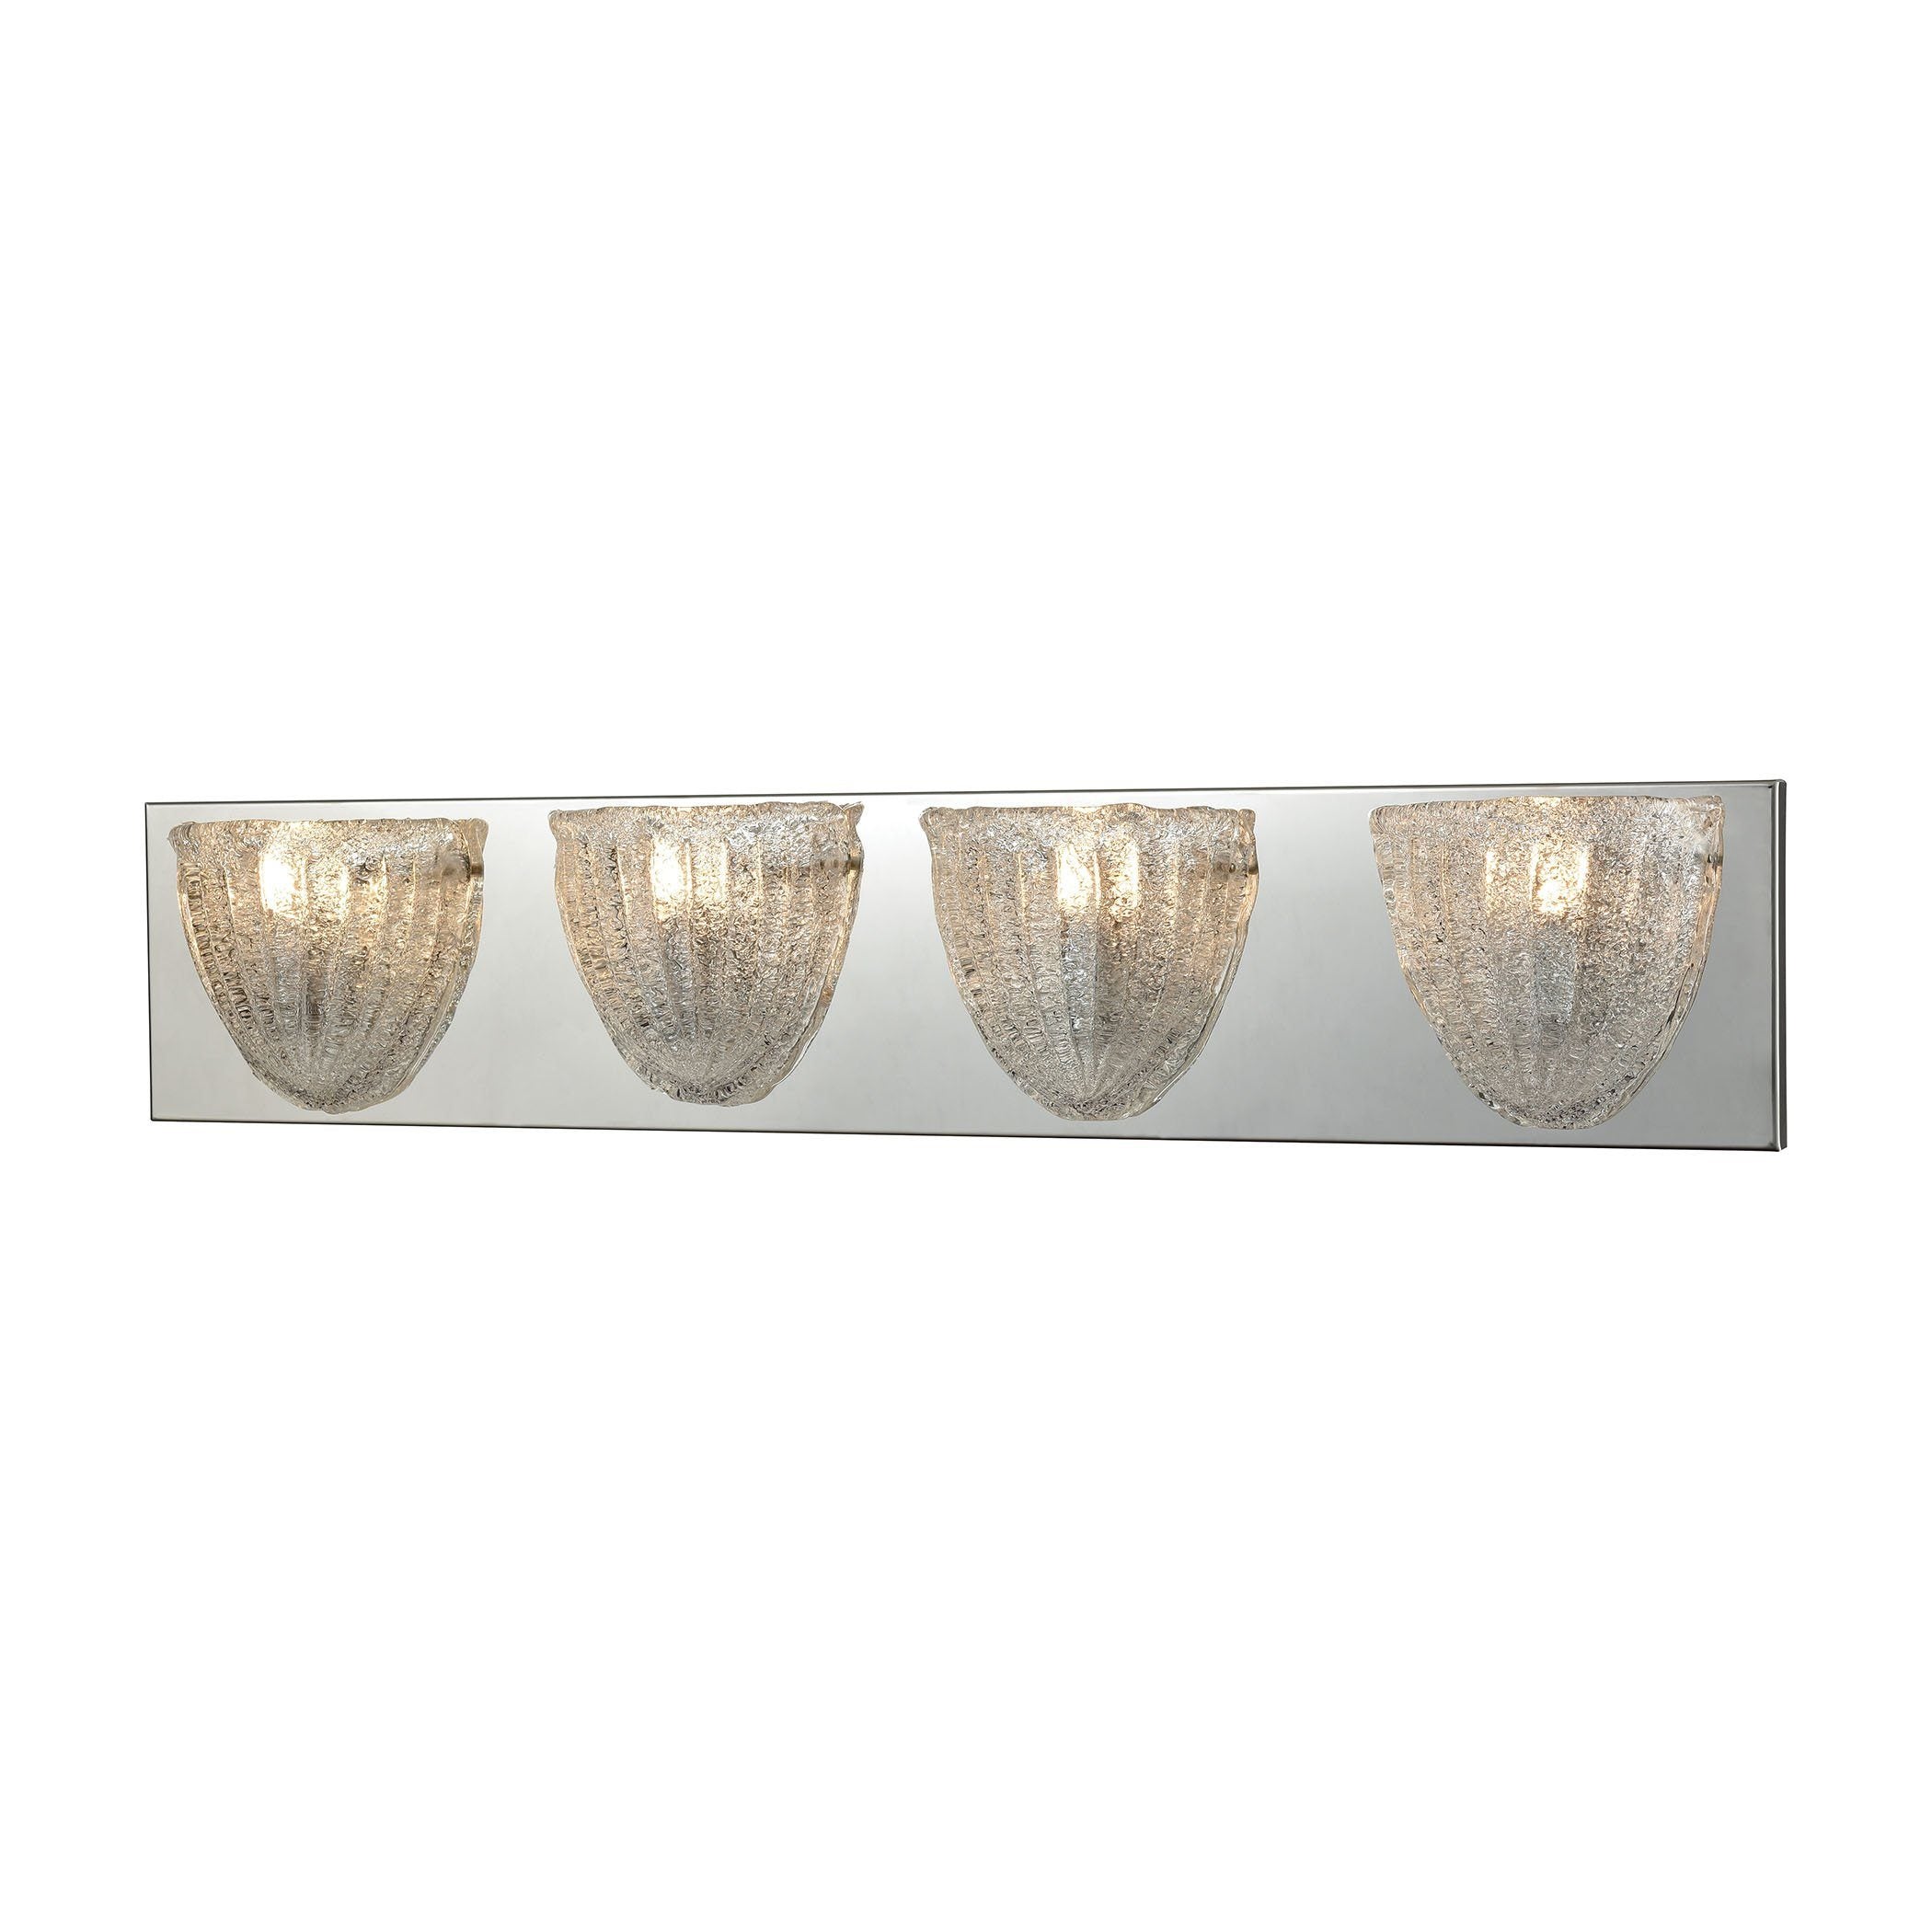 Verannis 4 Light Vanity In Polished Chrome With Hand-Formed Clear Sugar Glass Wall Elk Lighting 